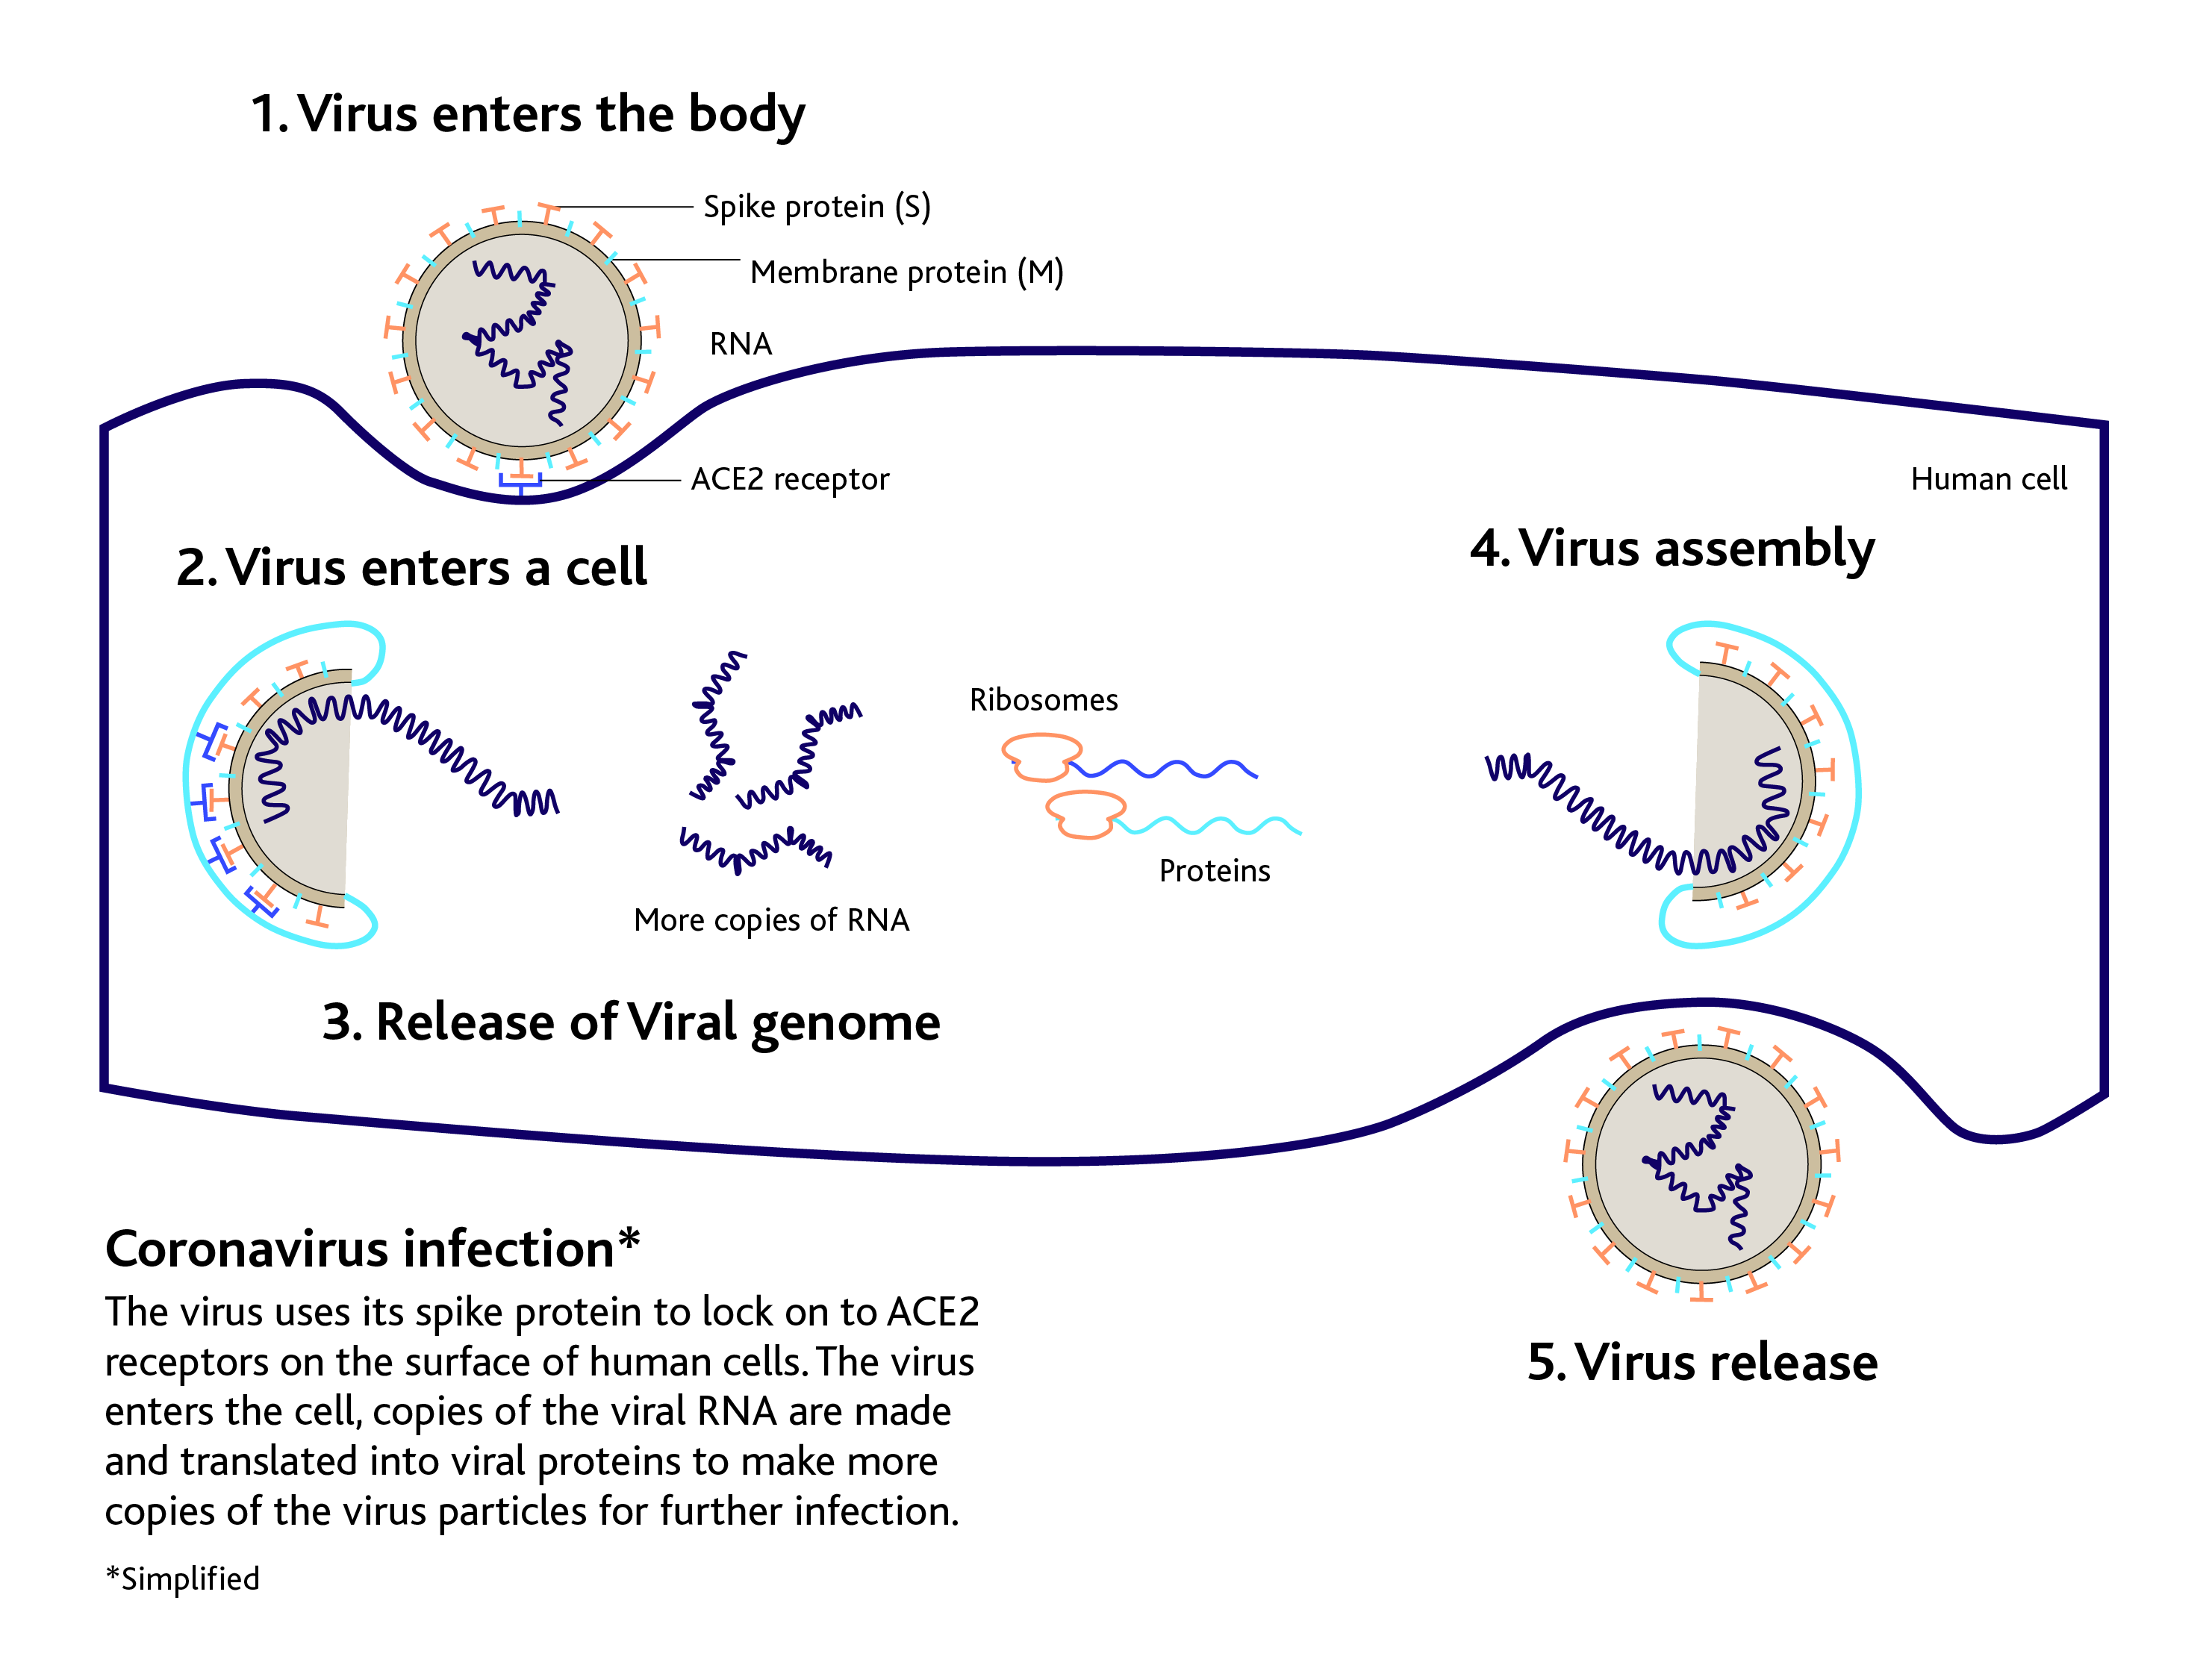 Illustration showing the binding of the virus to ACE-2 receptors activates the cell to engulf the virus. Once inside, the virus takes over the host cell machinery to make more copies of the virus RNA and envelope proteins. The assembled virus then exits the cell to infect other cells.